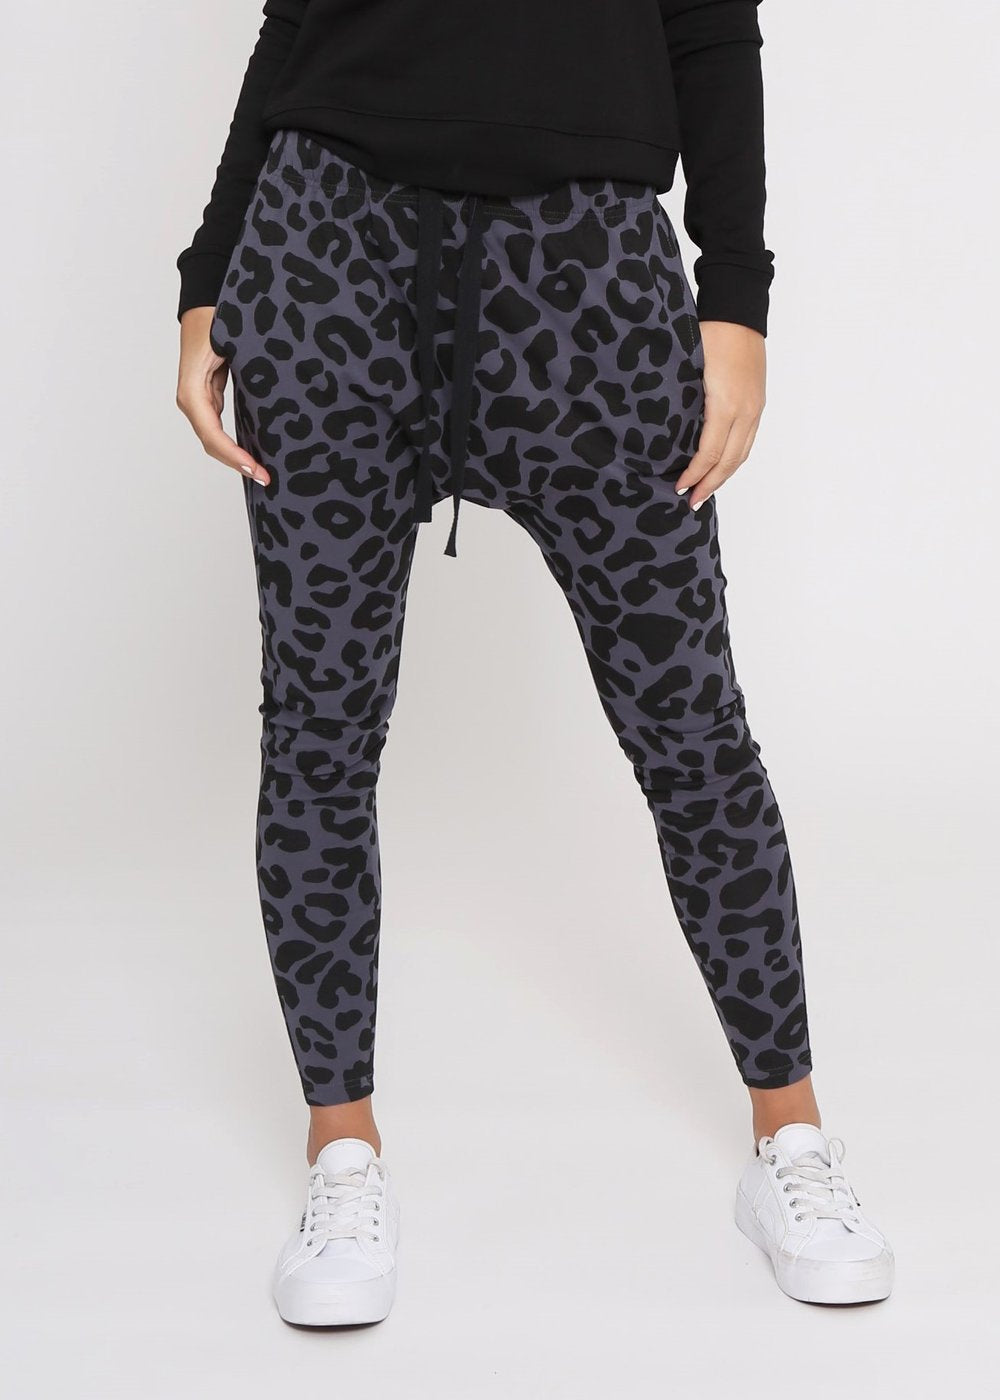 Leopard Print Pants  Basic State Style Traders